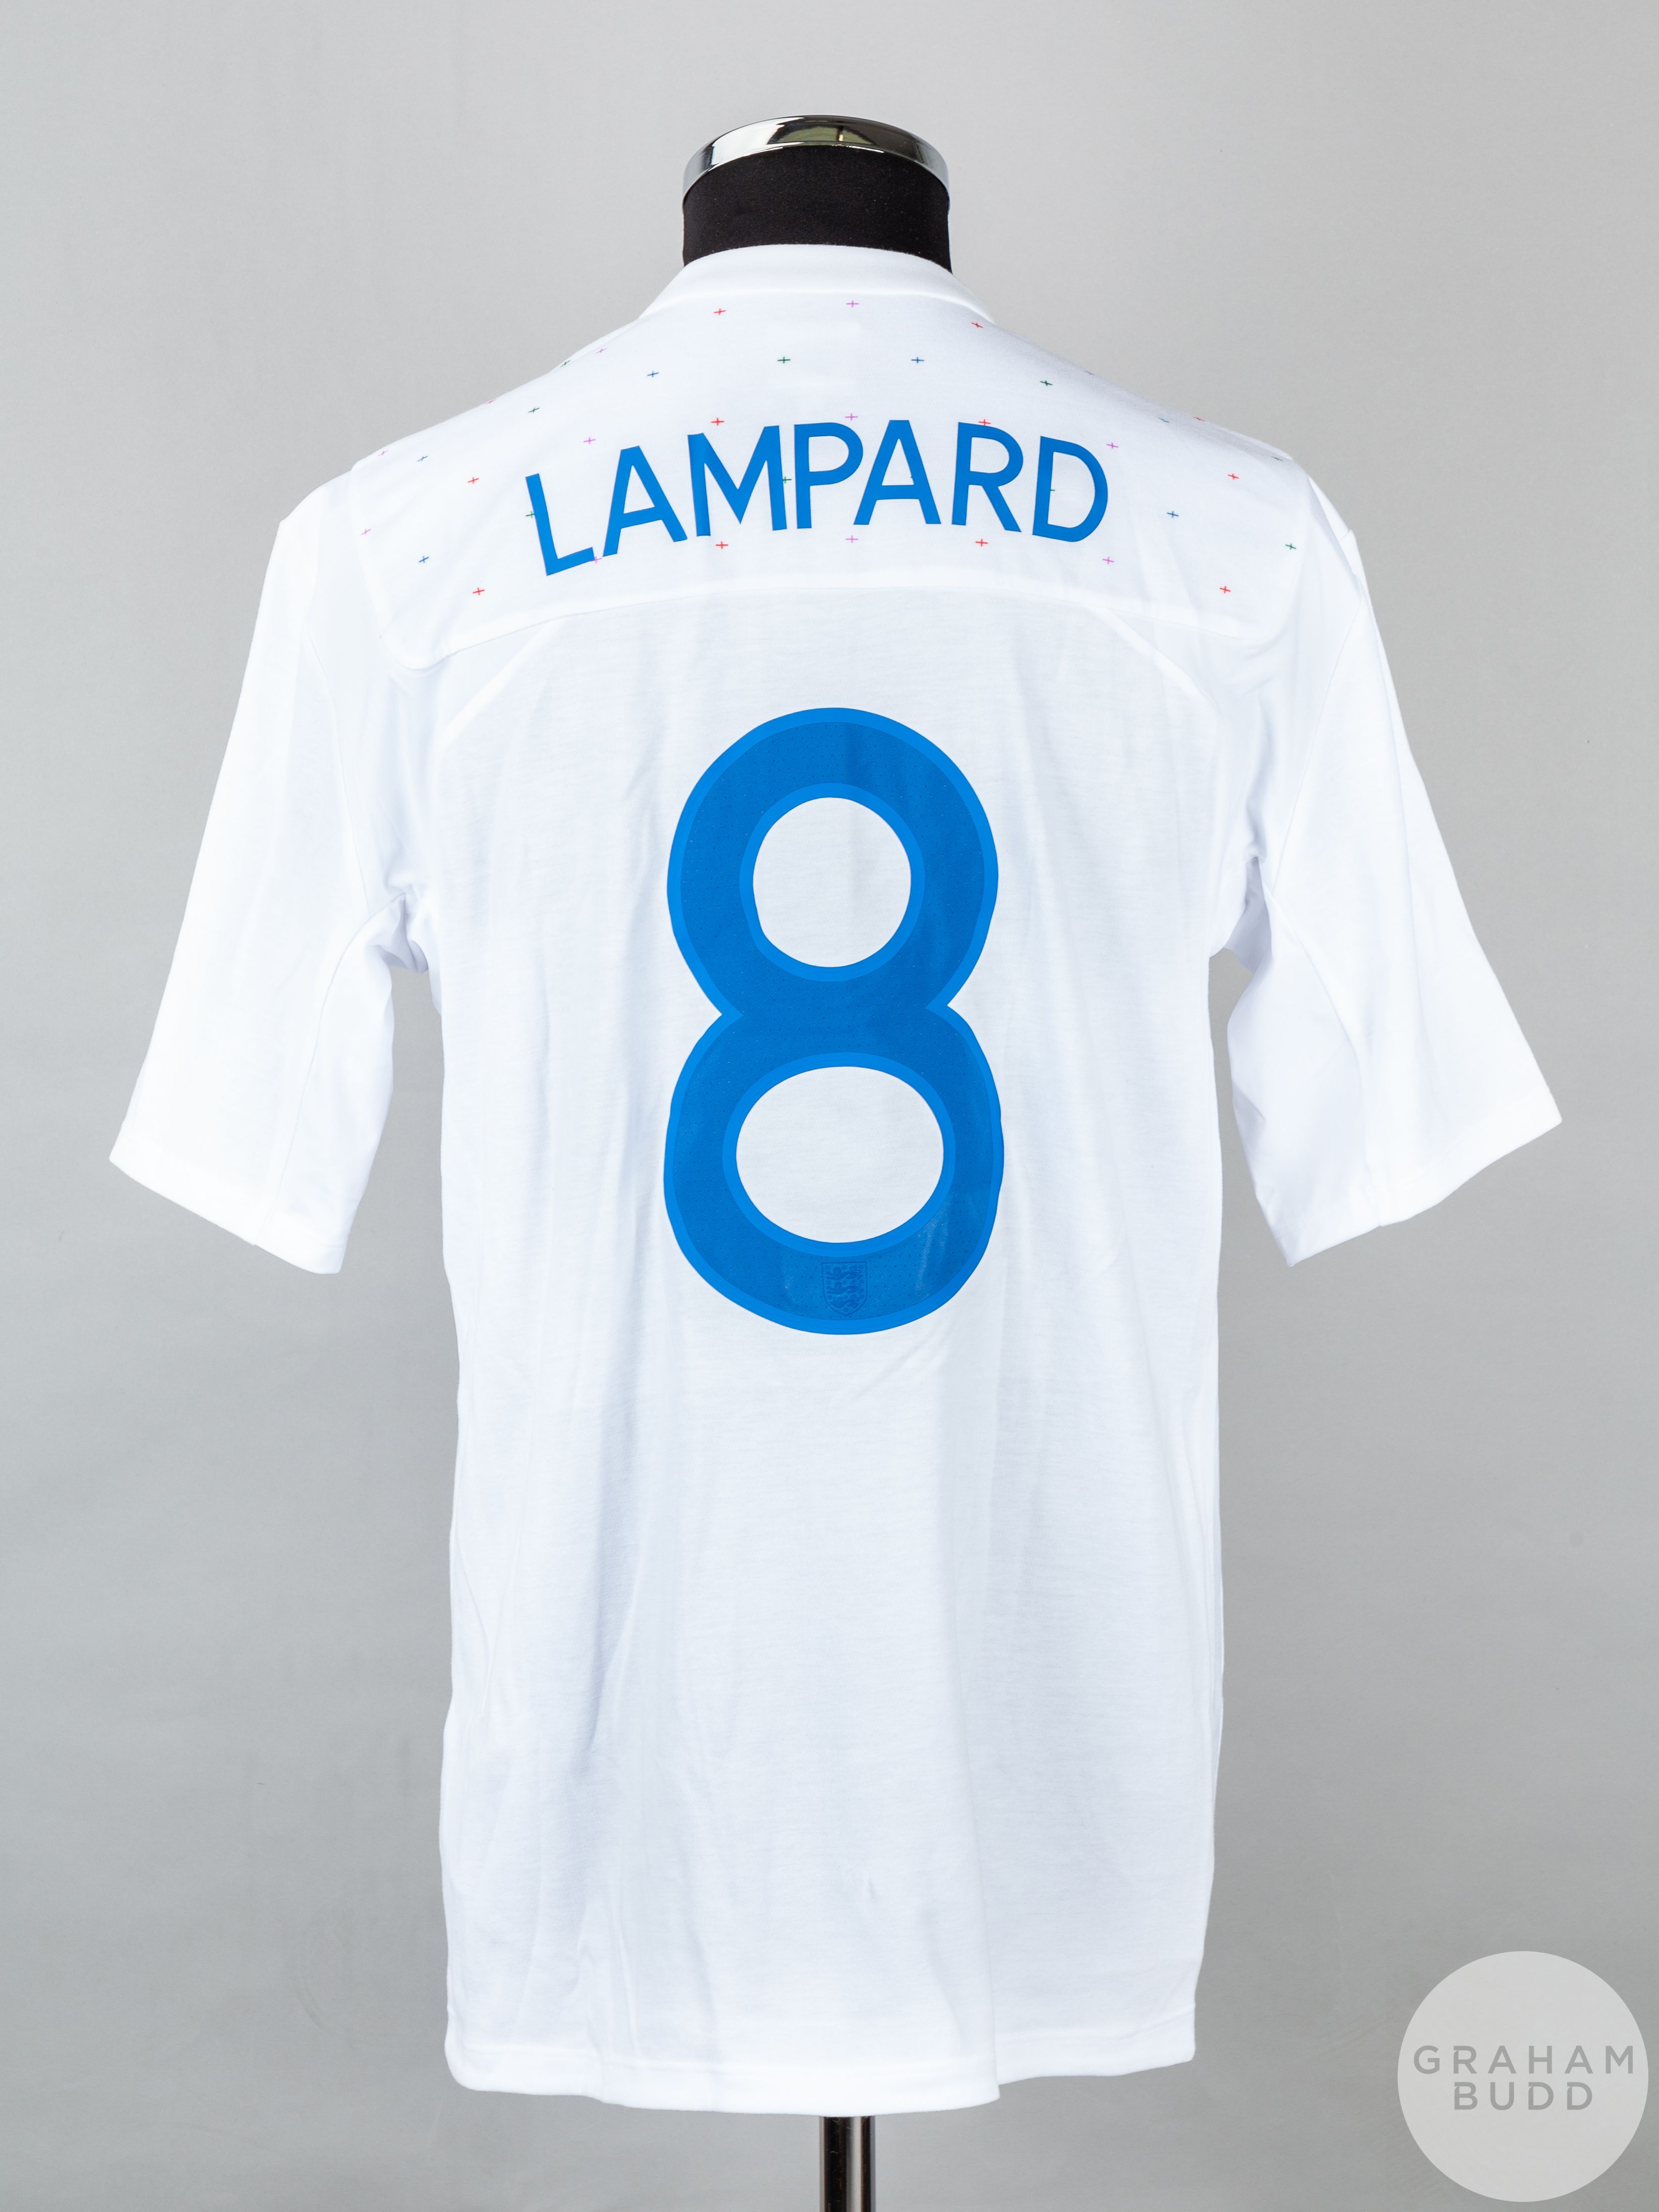 Frank Lampard white No.8 England match issued short-sleeve shirt - Image 2 of 5